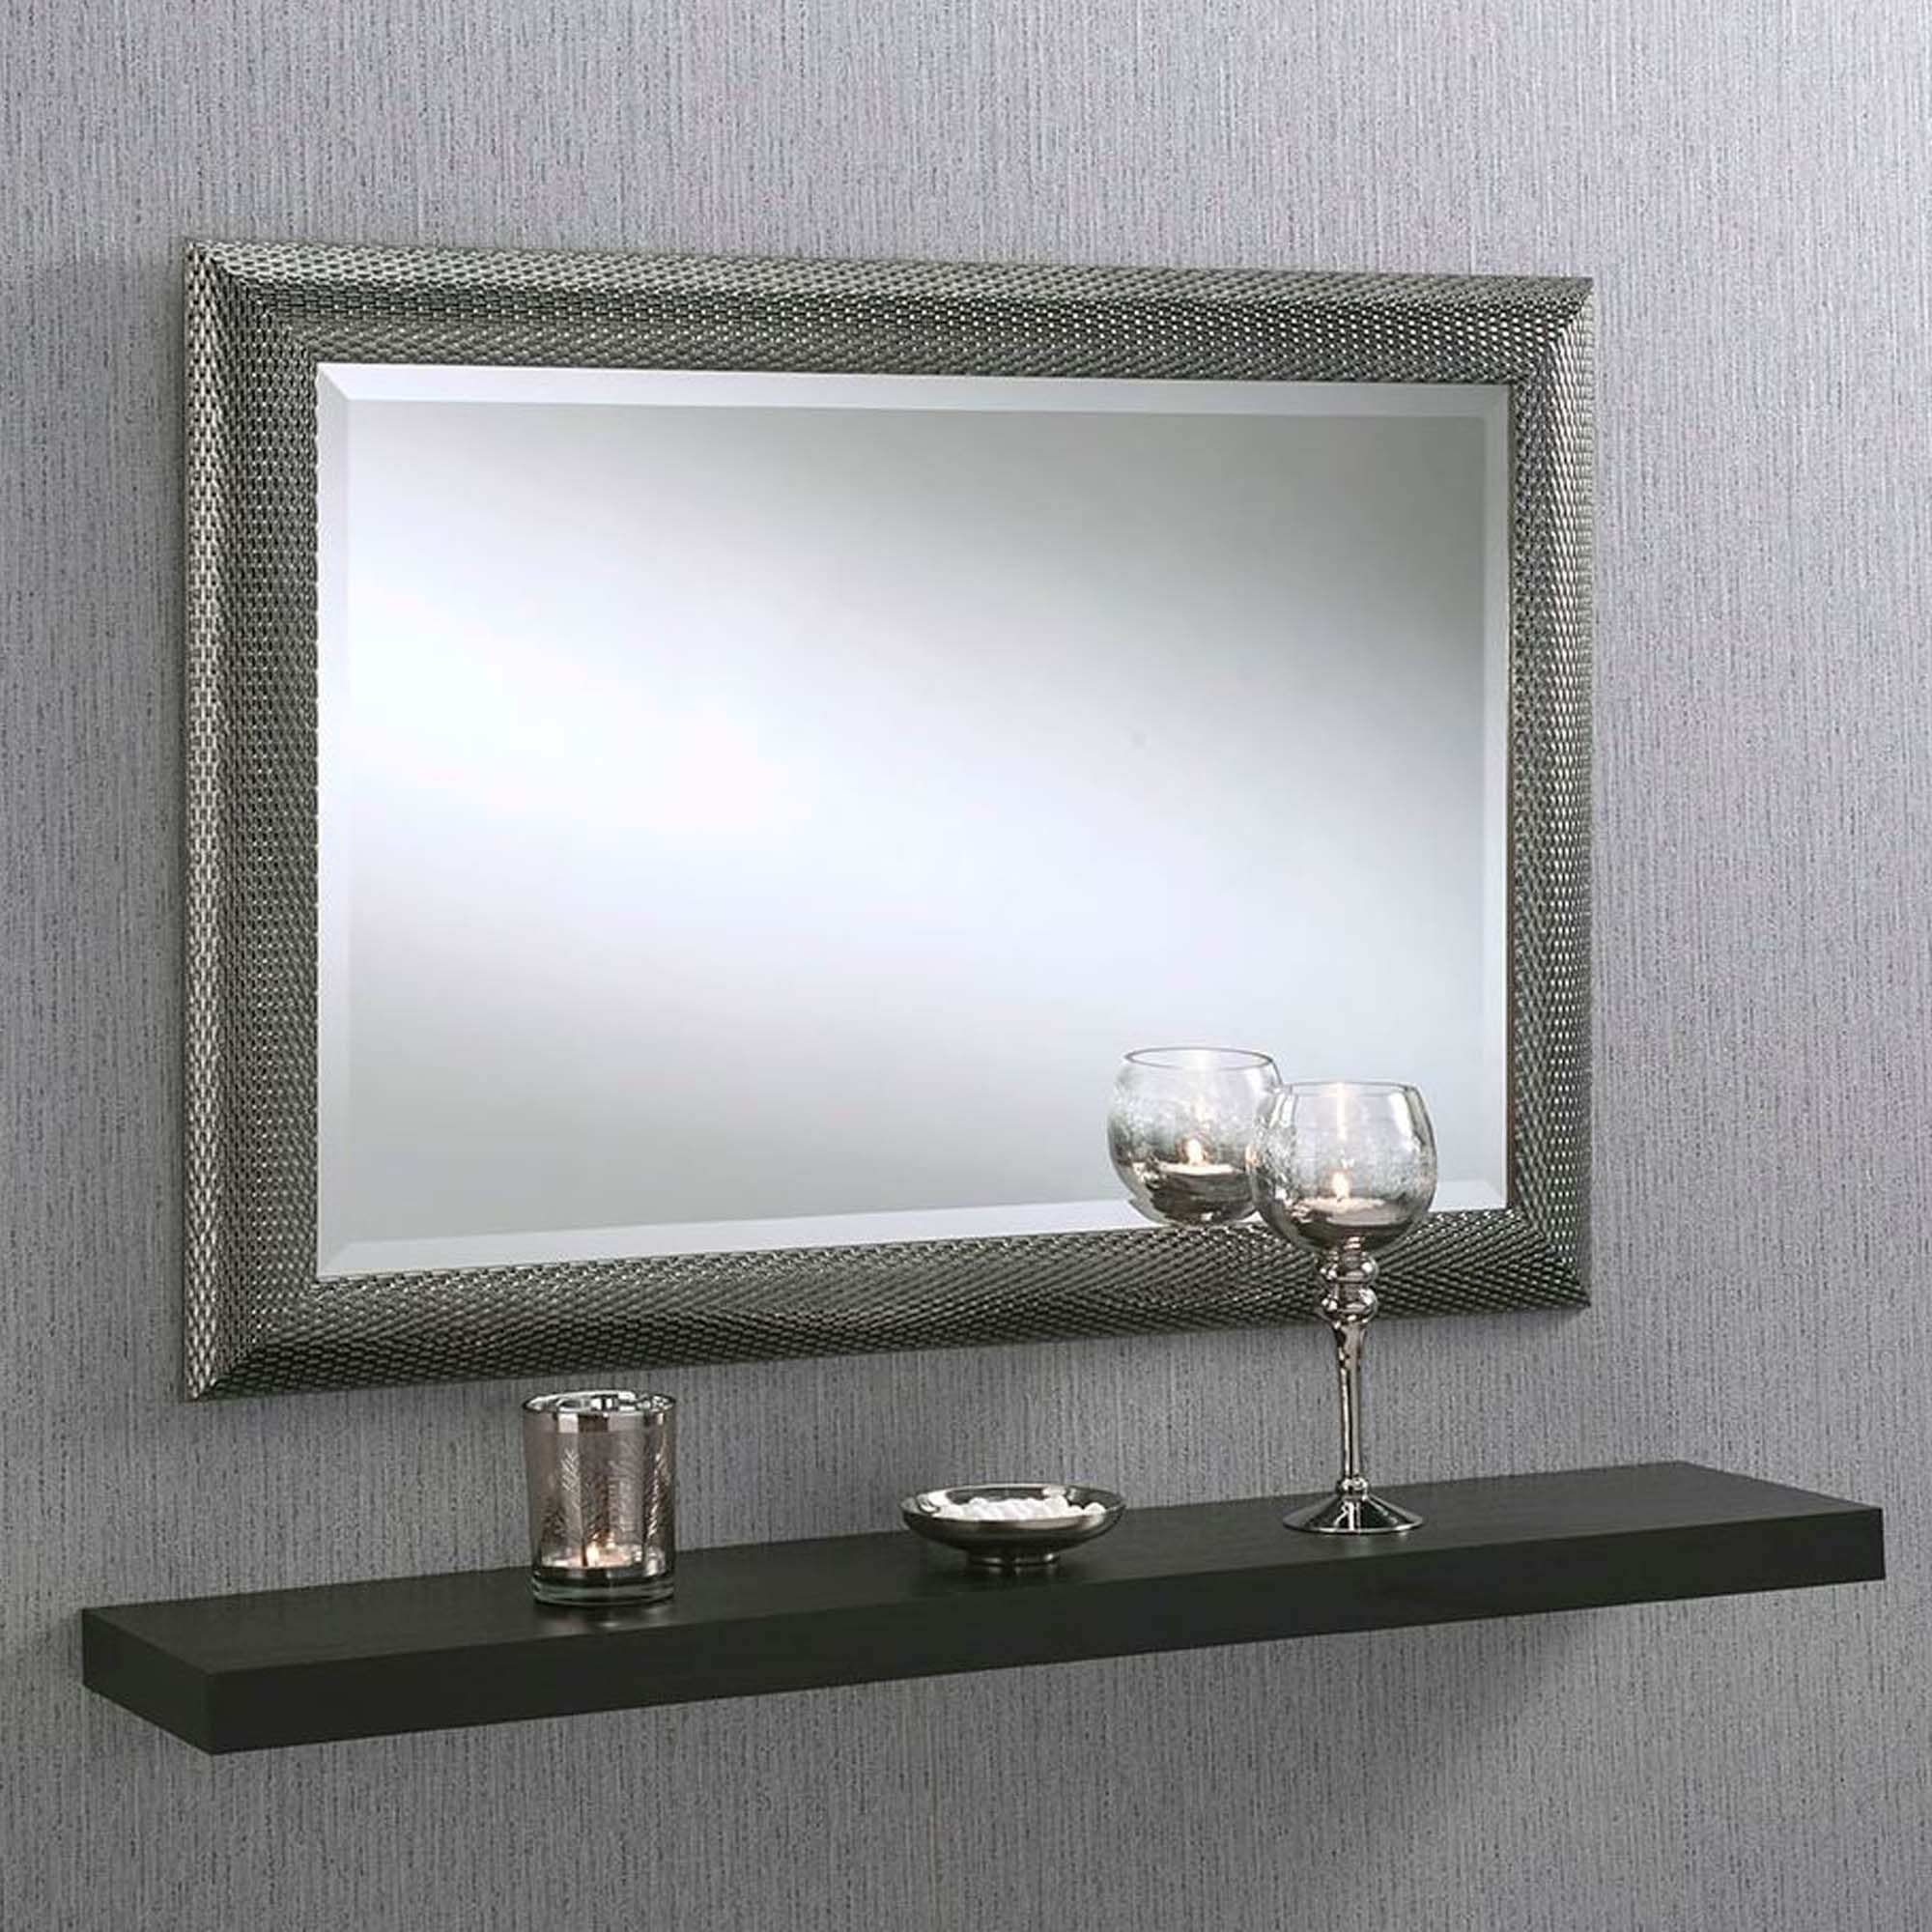 Dimple Effect Grey Rectangular Wall Mirror | Homesdirect365 Inside Wall Mirrors (View 1 of 15)